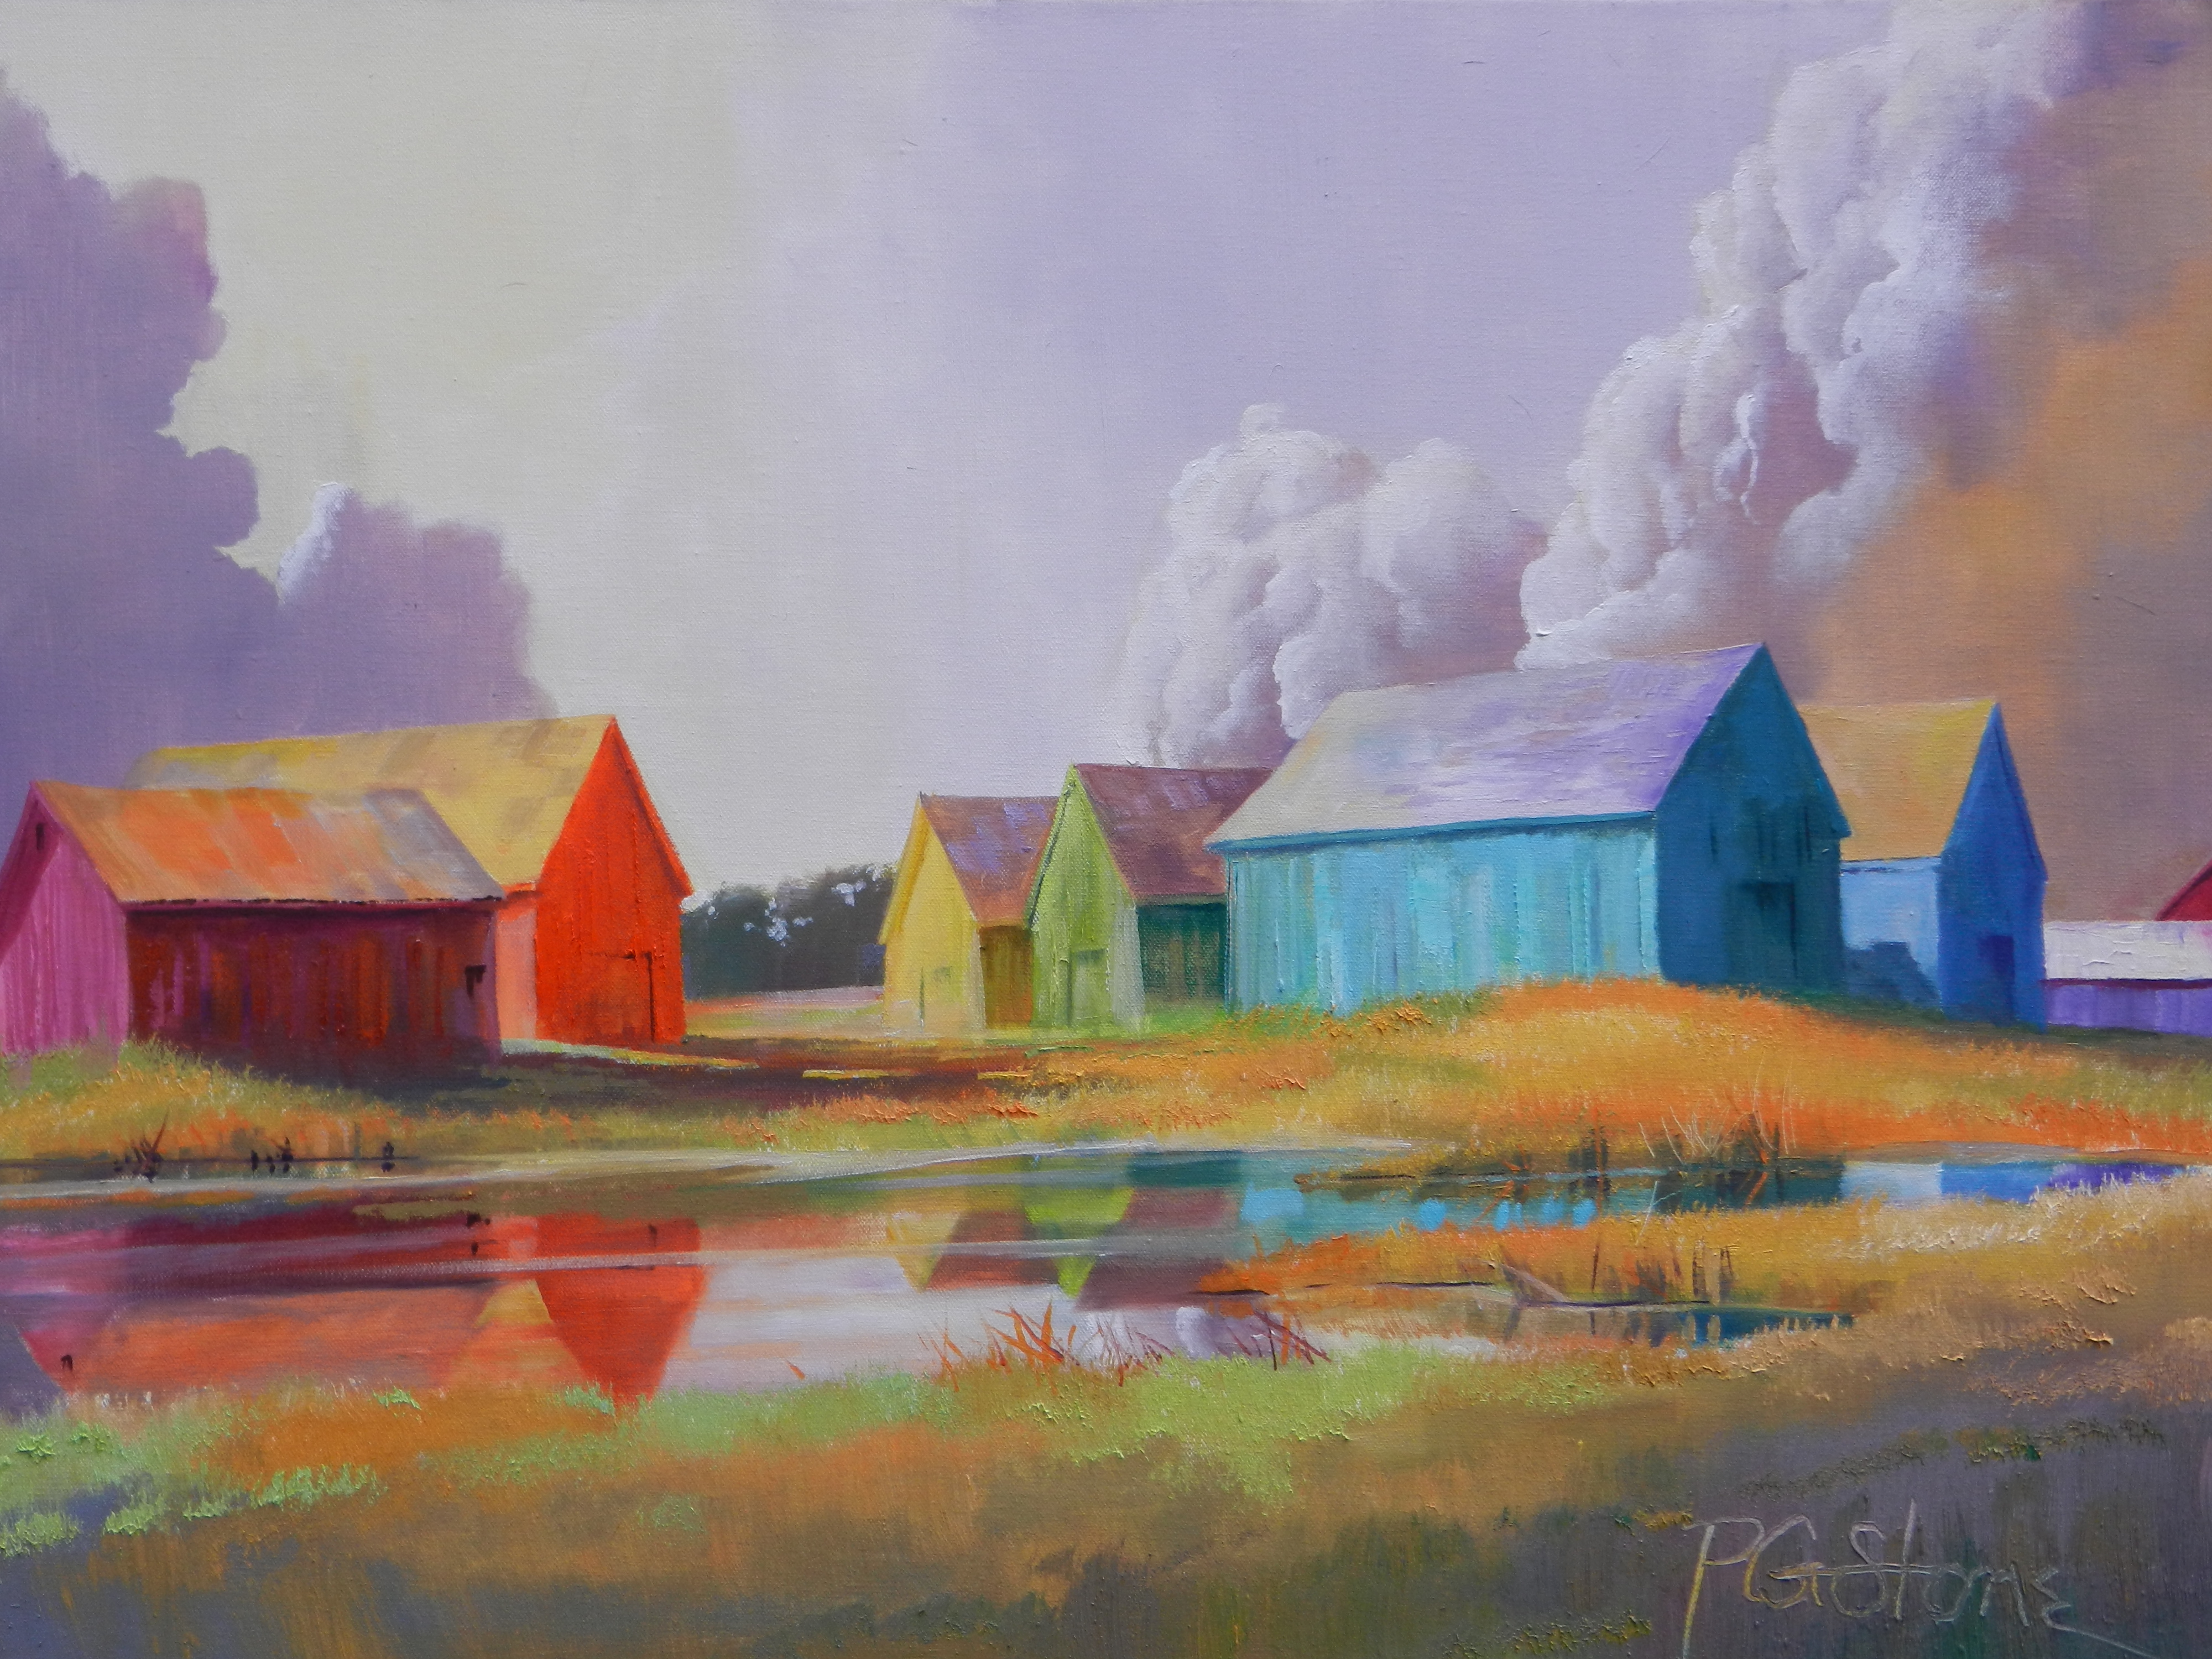 An Octave of Barns by Paul Stone